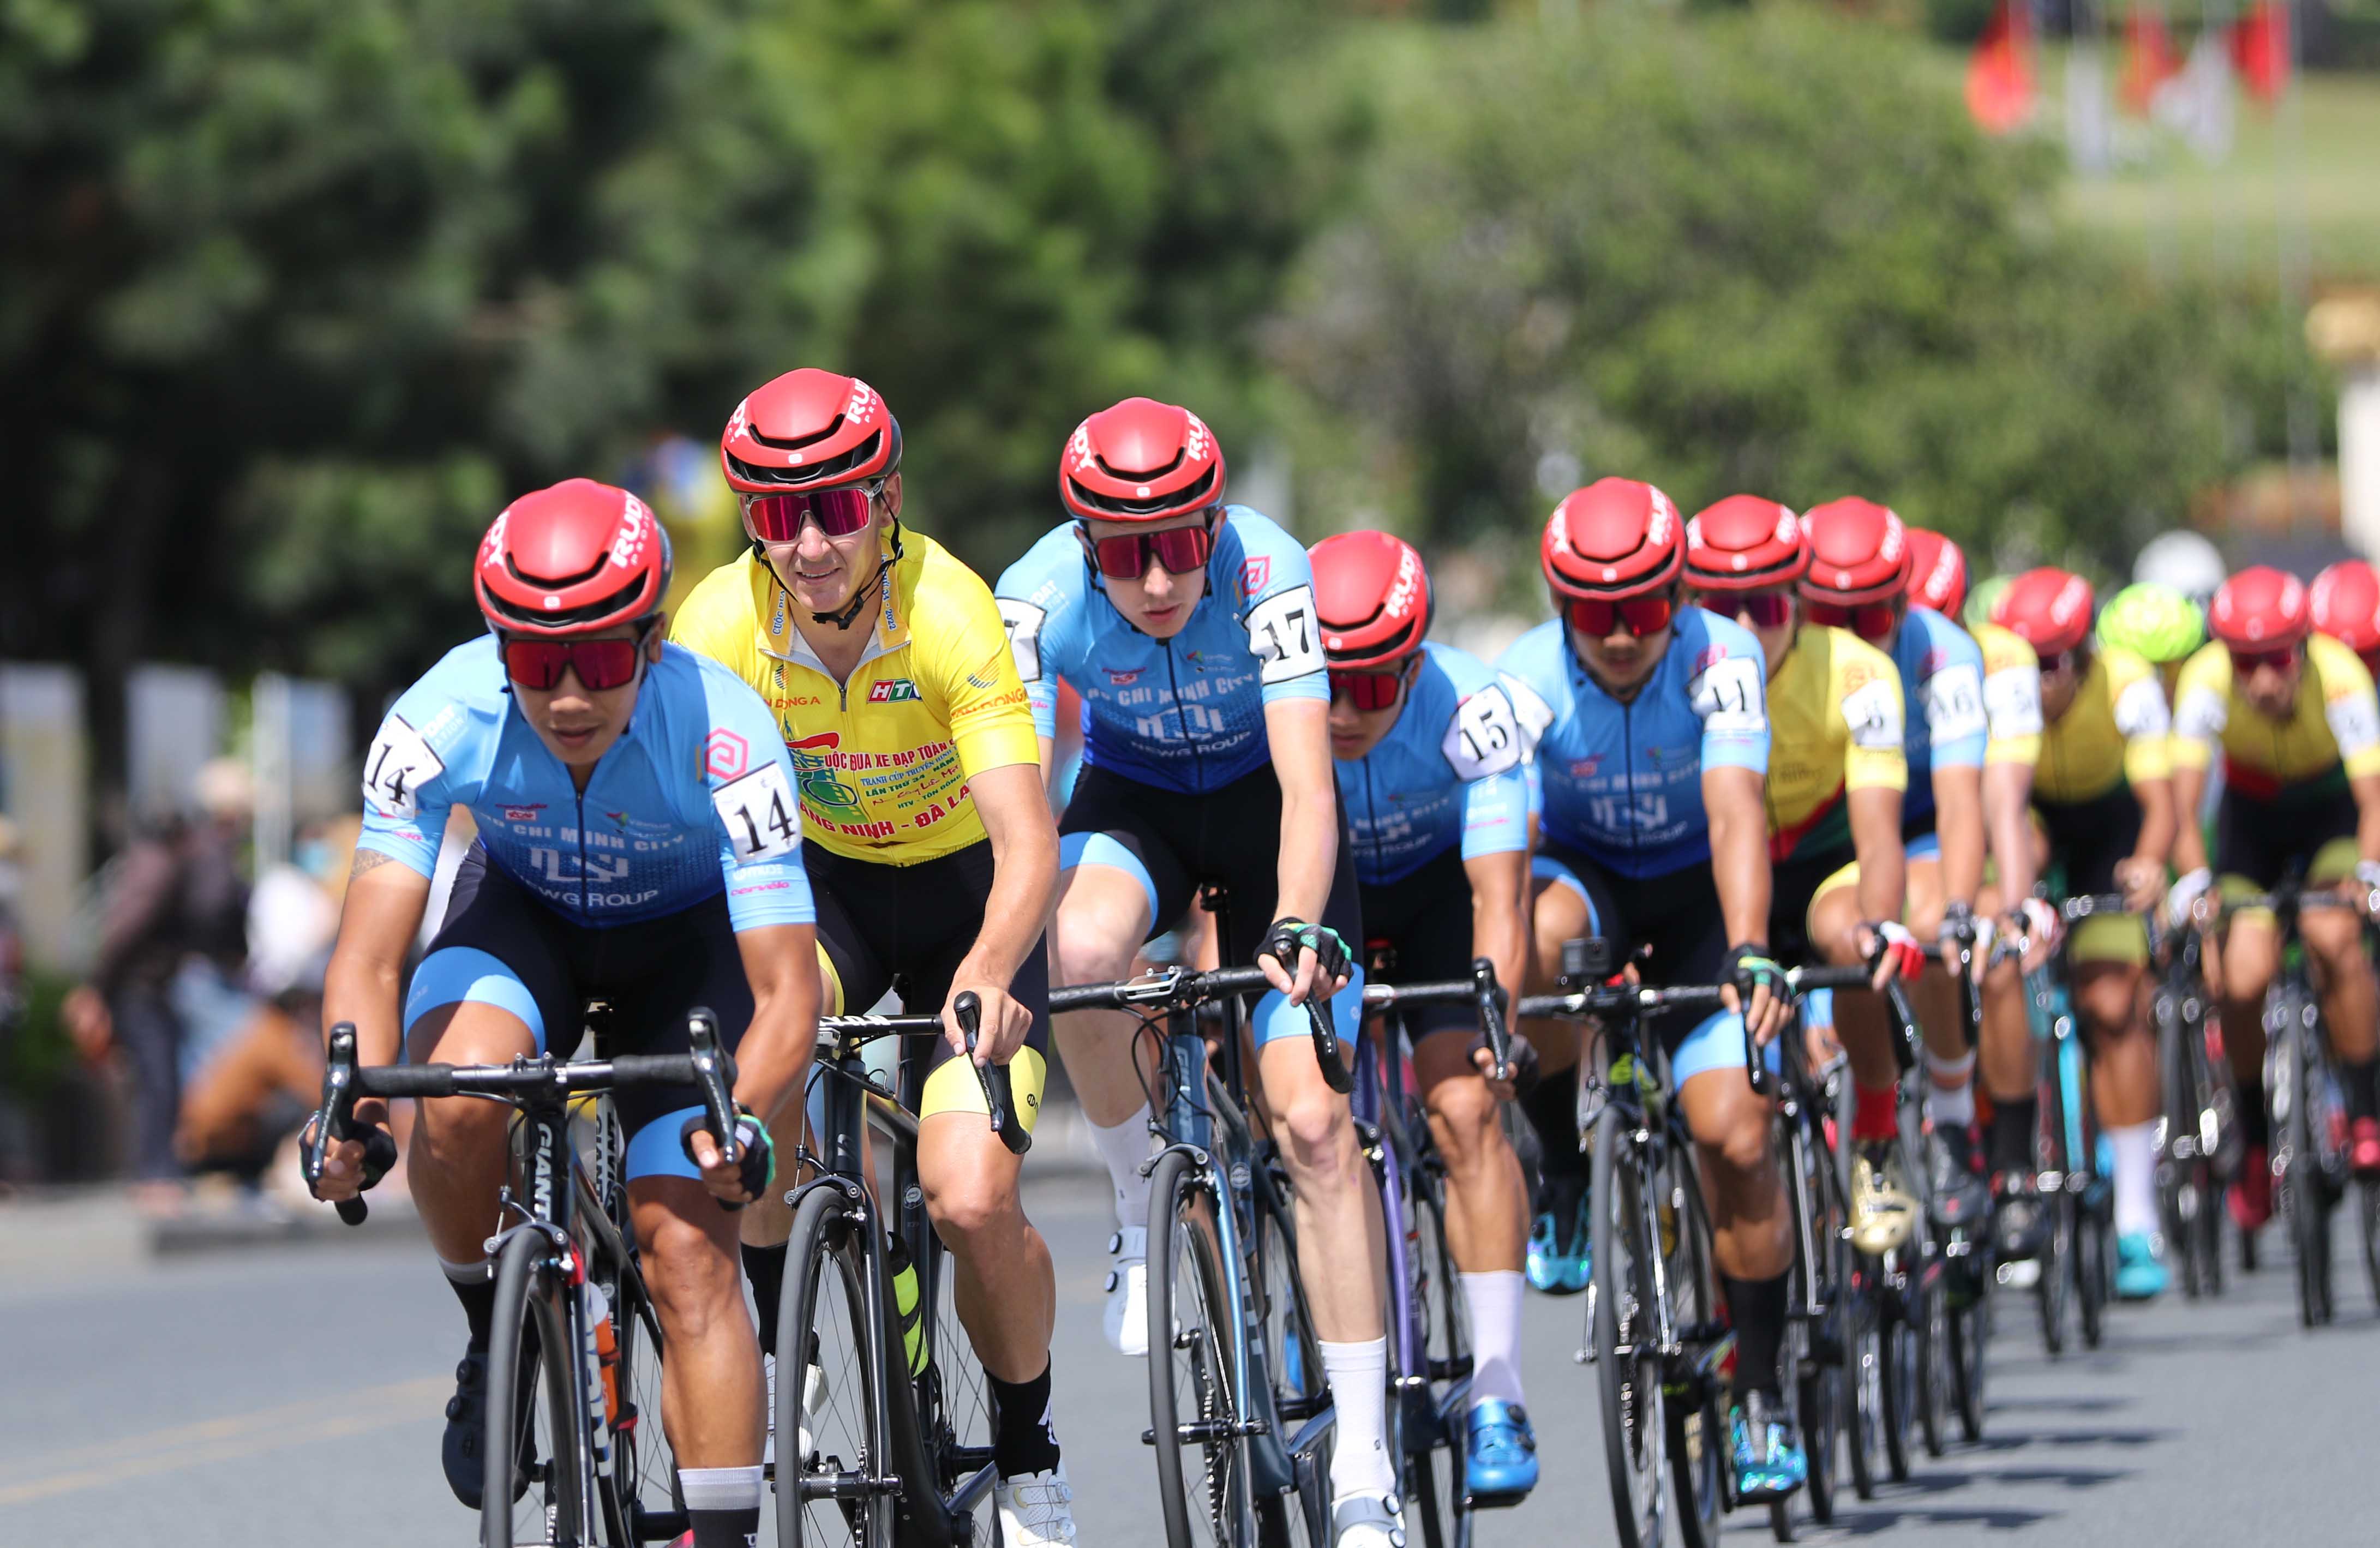 Cyclists race in the 21st round of the 2022 Ho Chi Minh City TV (HTV) Cup tournament in Da Lat City, Lap Dong Province, Vietnam, April 28, 2022. Photo: T.P. / Tuoi Tre